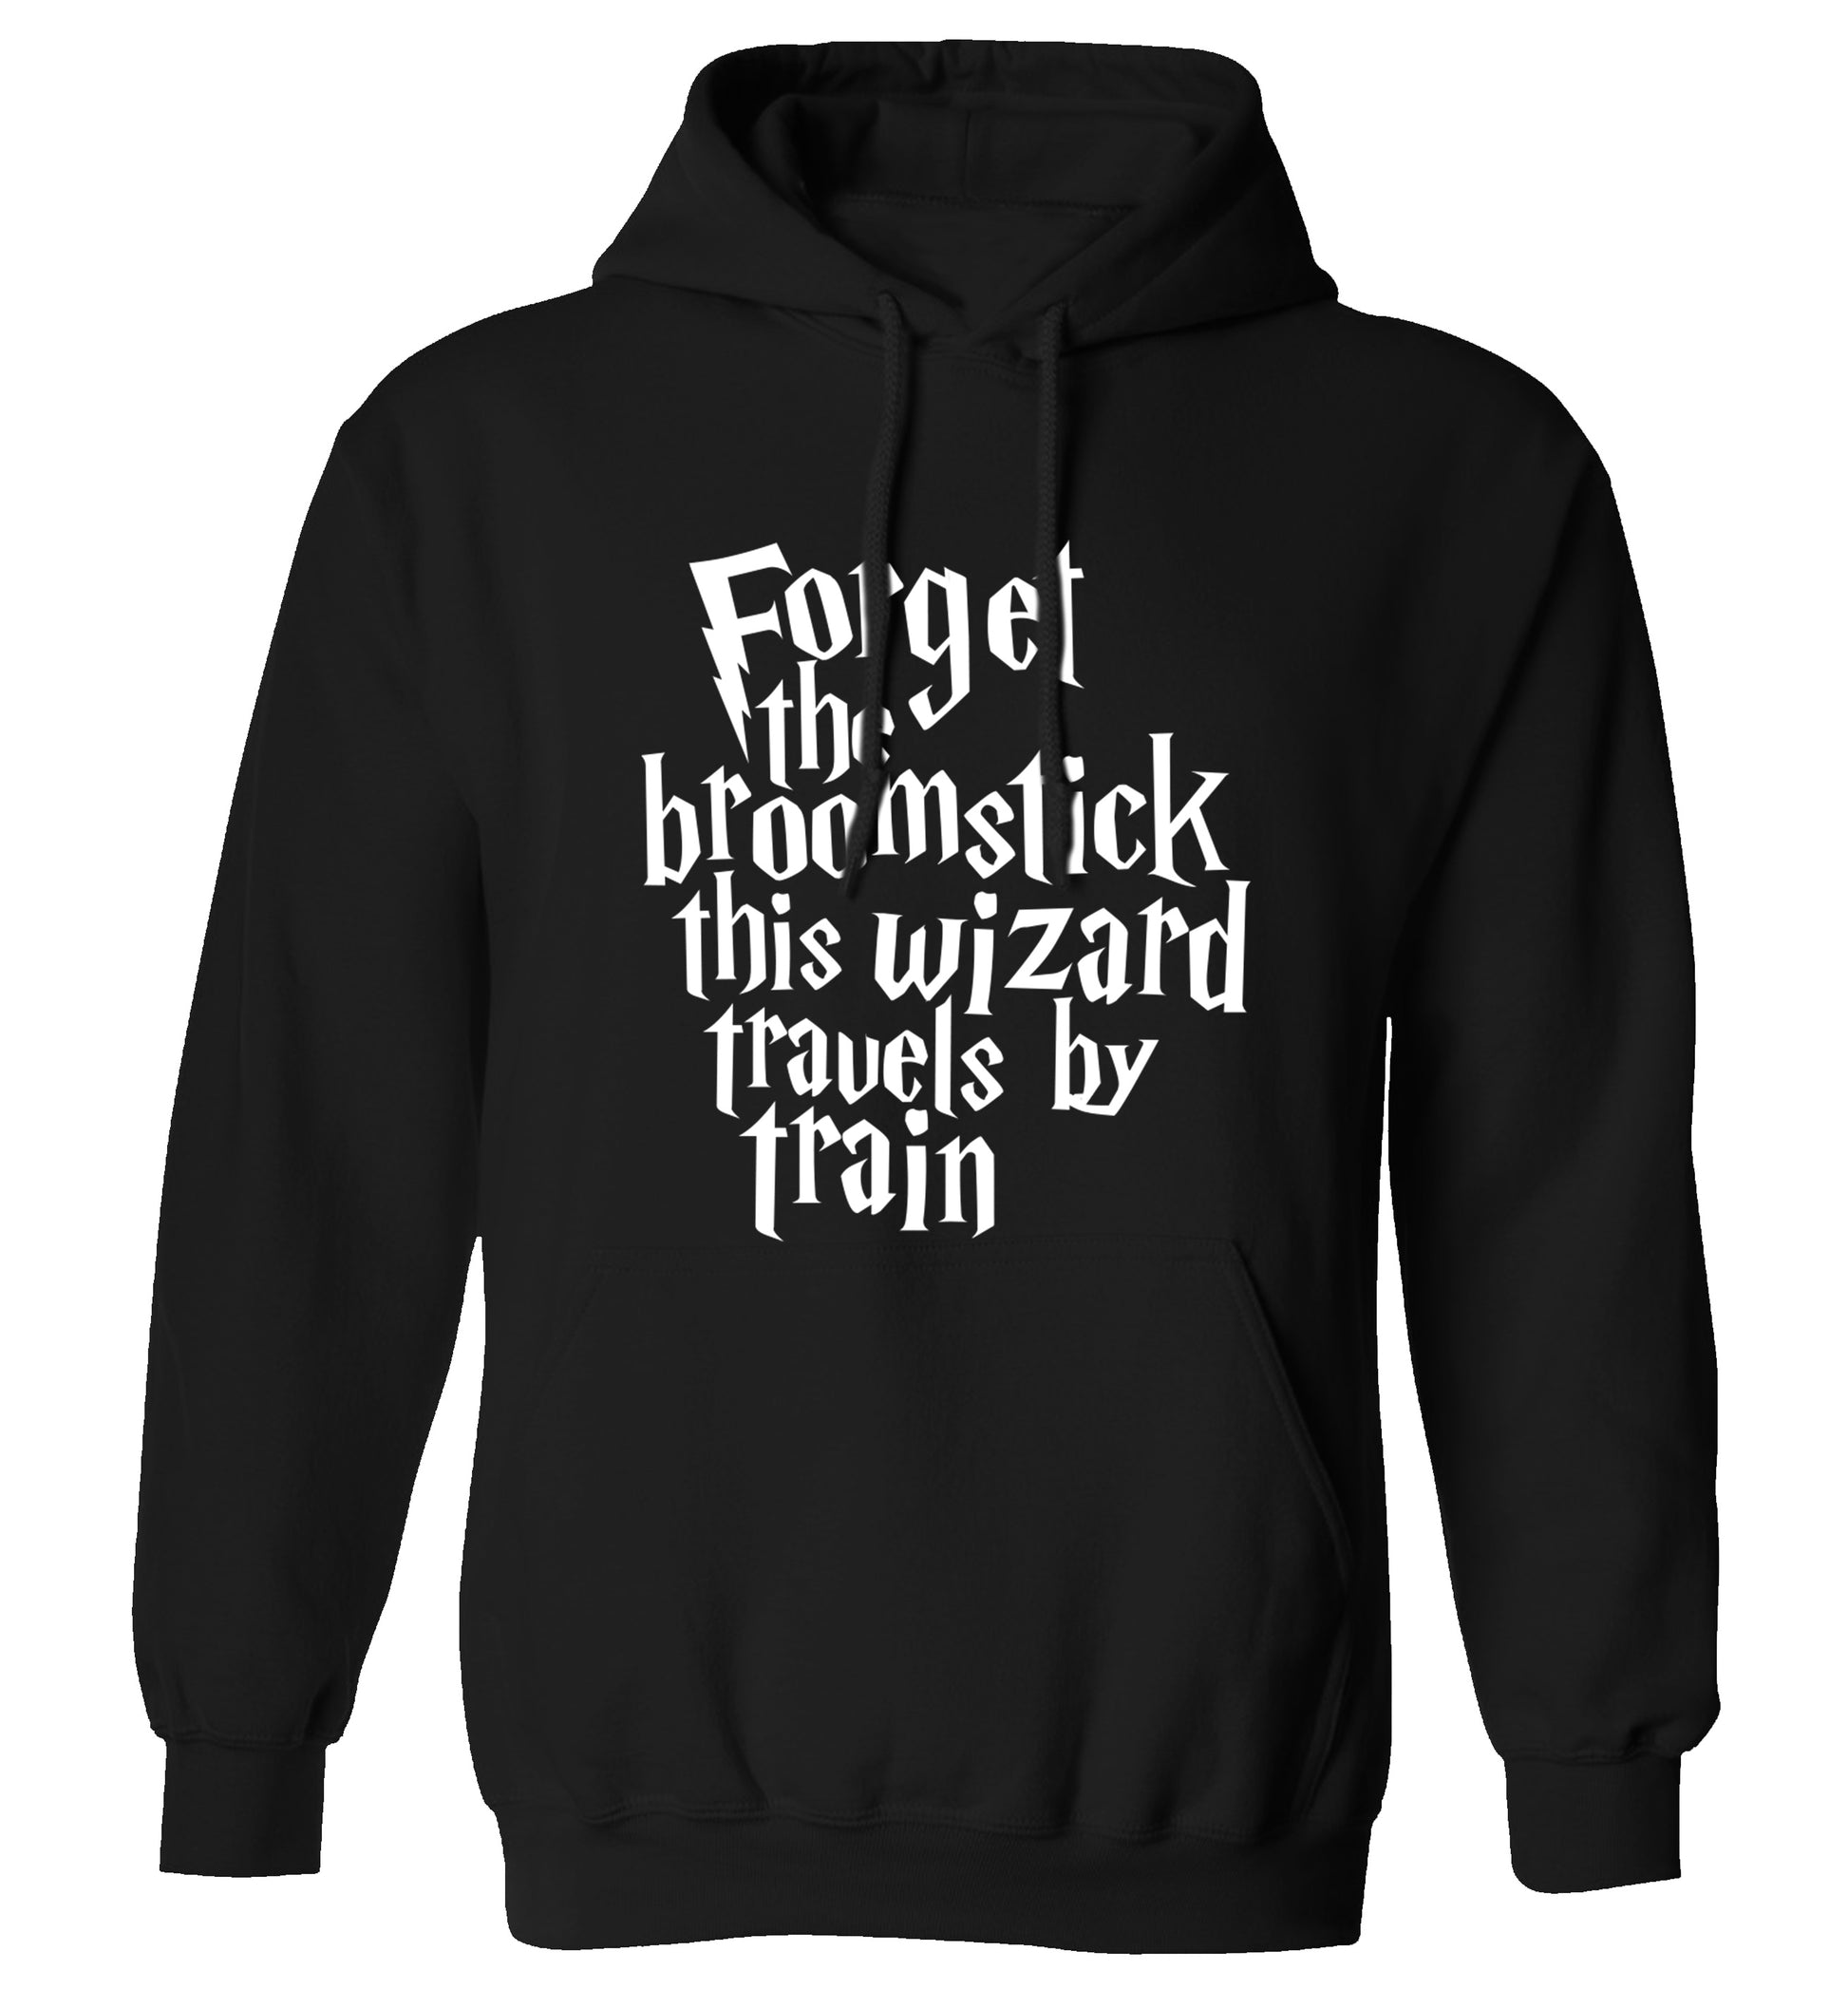 Forget the broomstick this wizard travels by train adults unisexblack hoodie 2XL